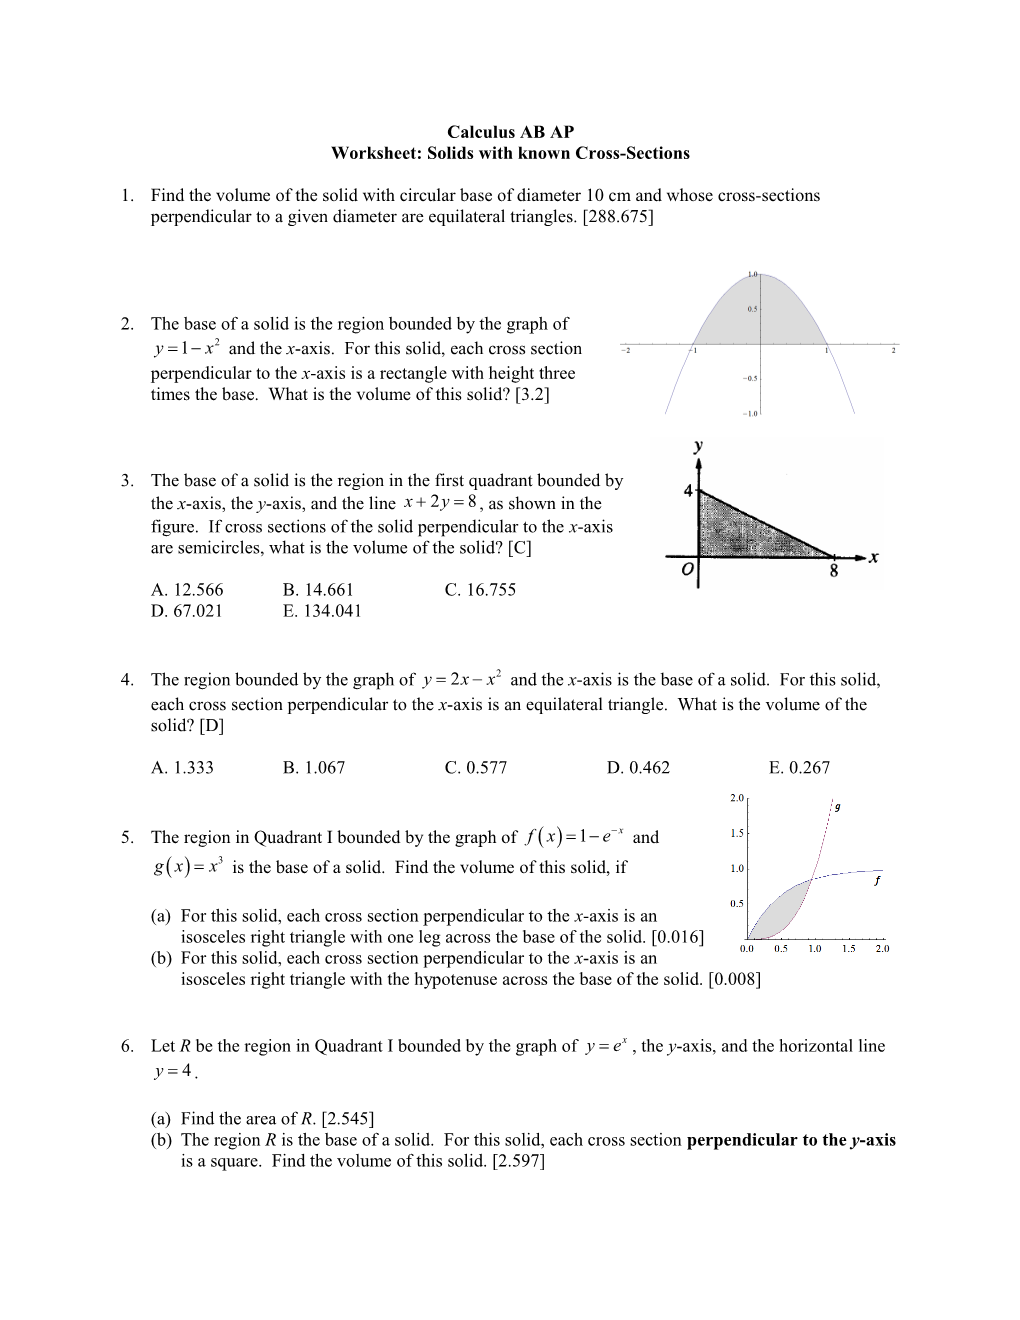 Worksheet: Solids with Known Cross-Sections